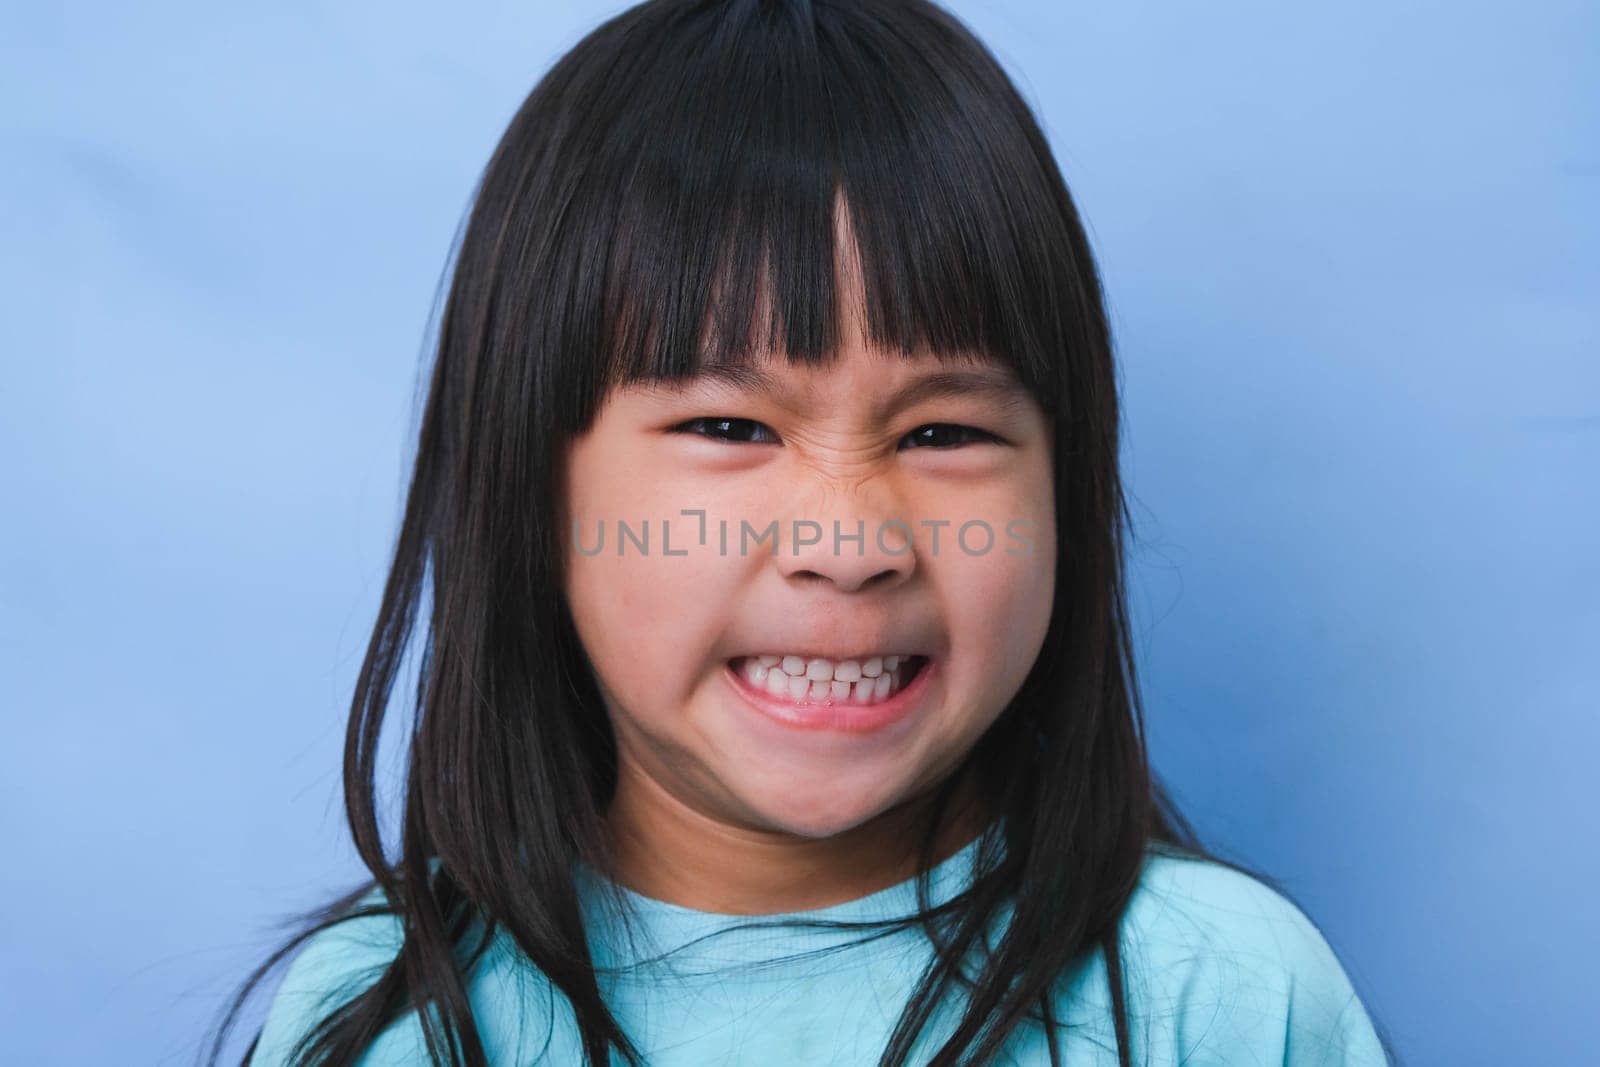 Close-up of smiling young girl revealing her beautiful white teeth on a blue background. Concept of good health in childhood.